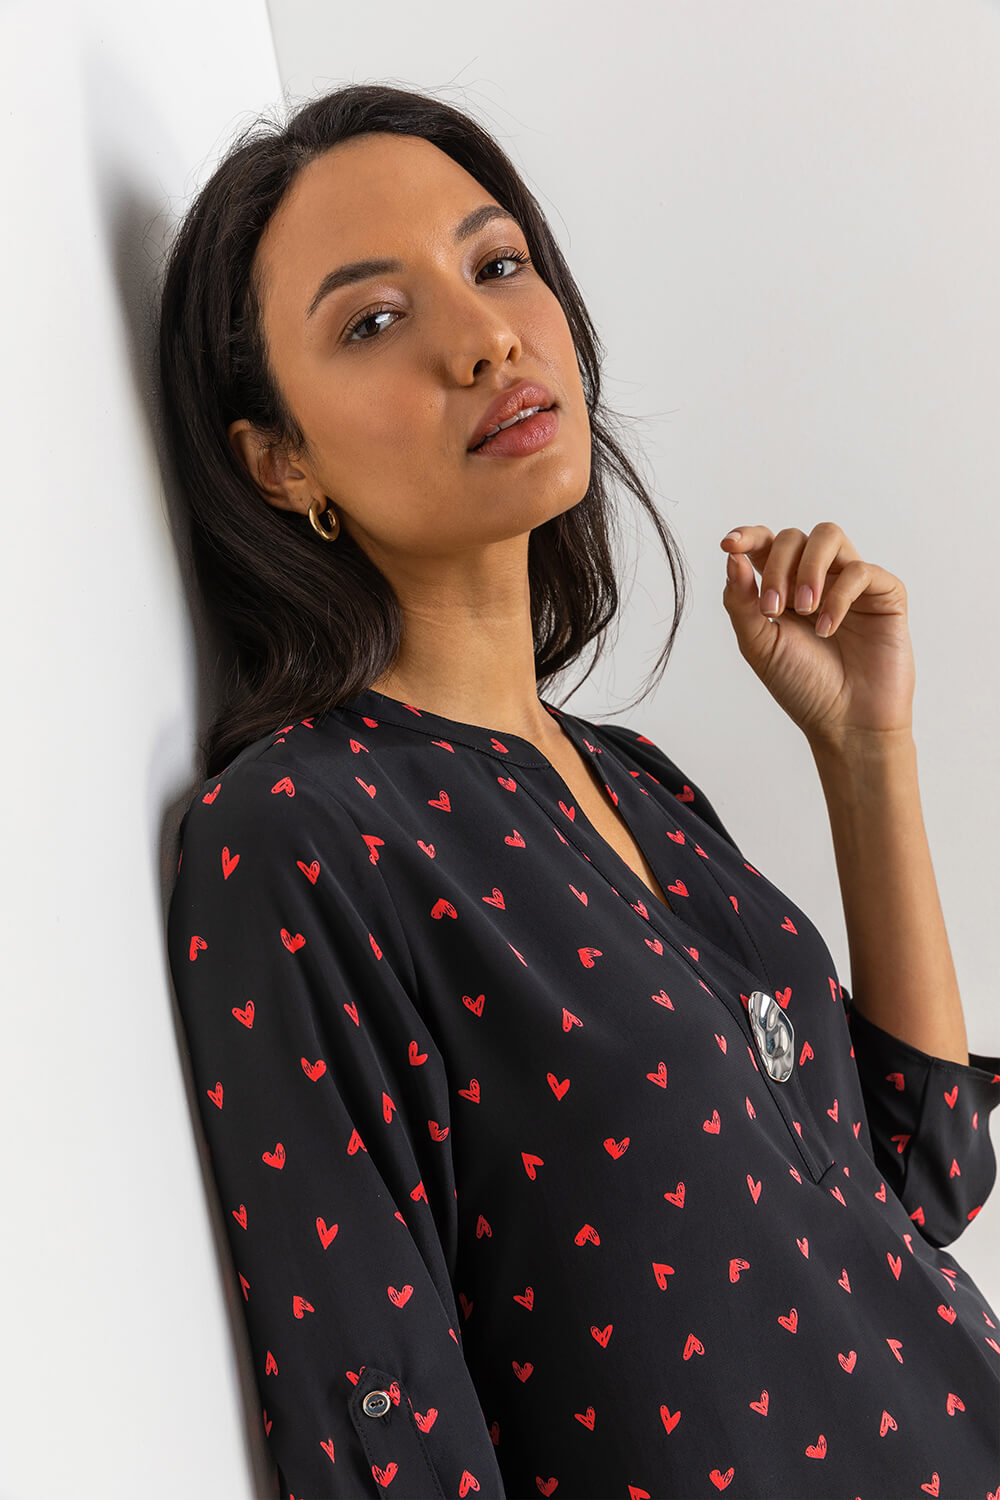 PINK Longline Button Detail Heart Print Top, Image 4 of 5